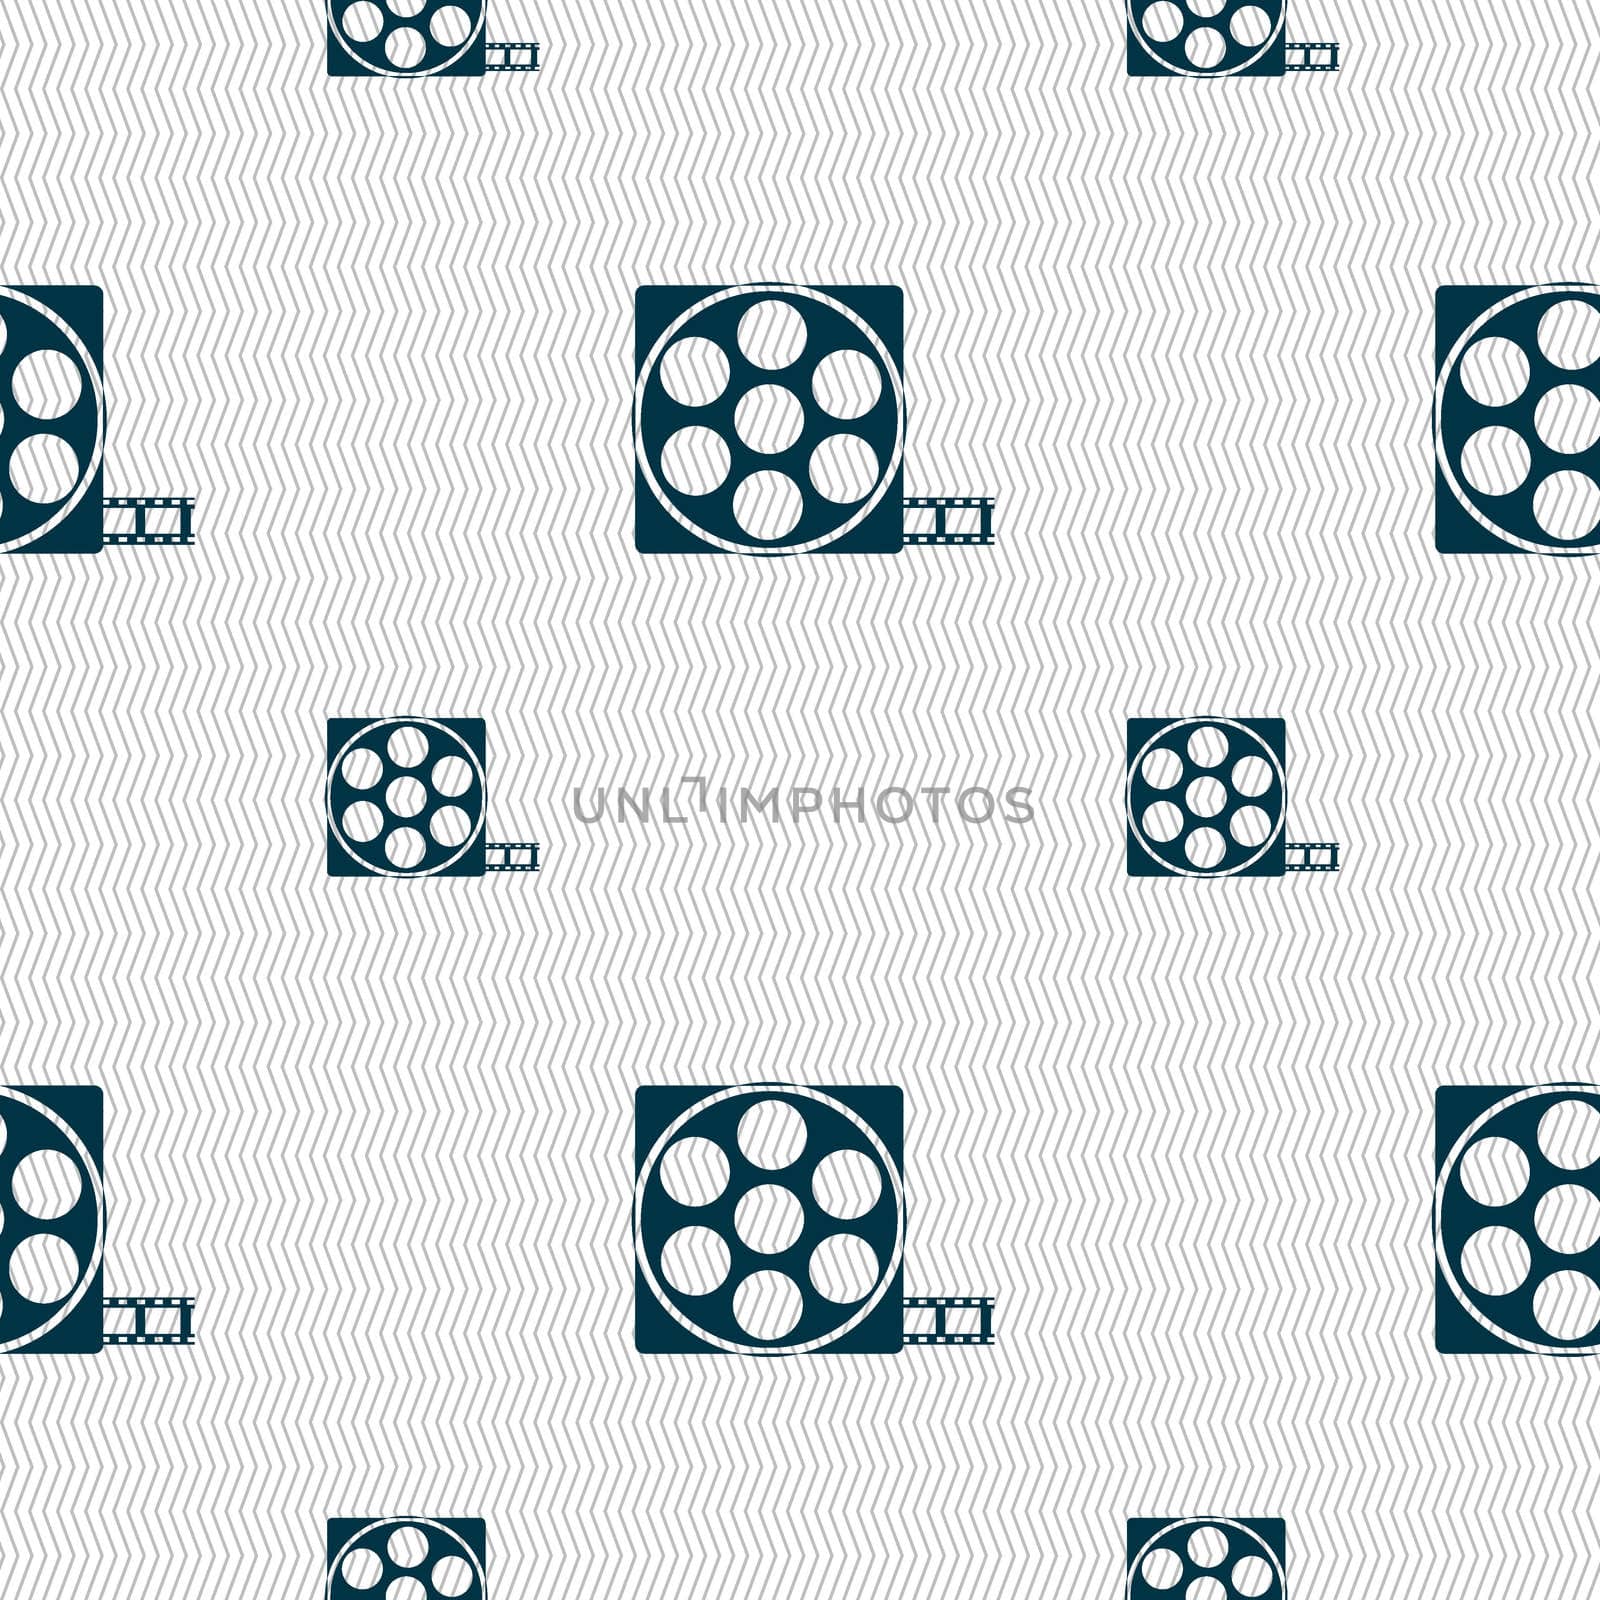 Video sign icon. frame symbol. Seamless pattern with geometric texture. illustration